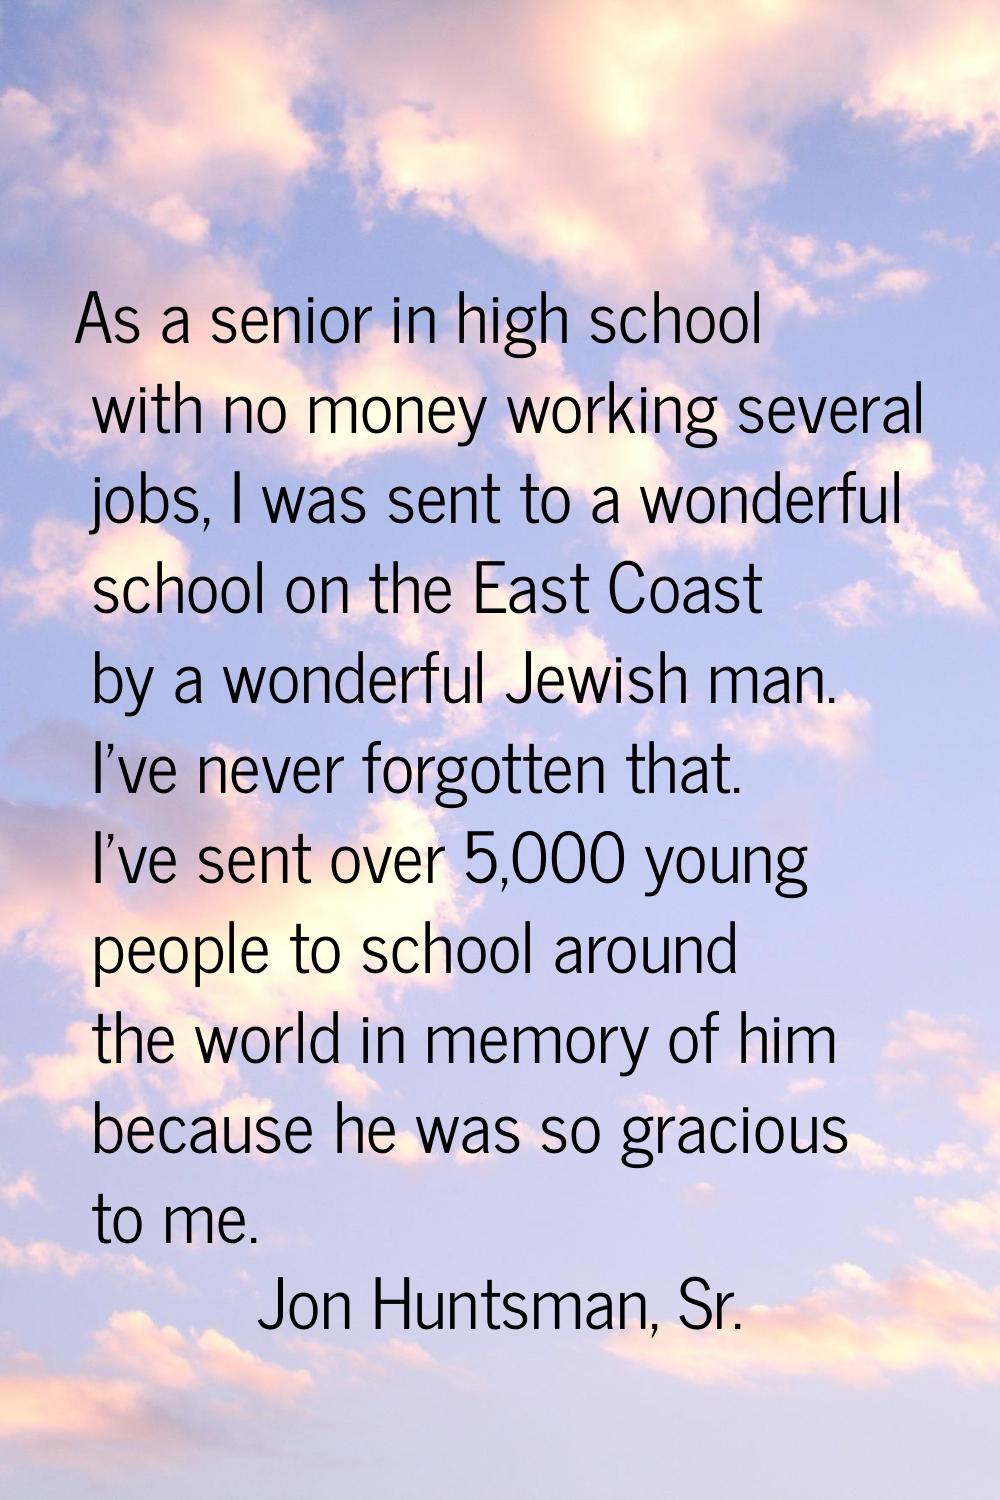 As a senior in high school with no money working several jobs, I was sent to a wonderful school on 